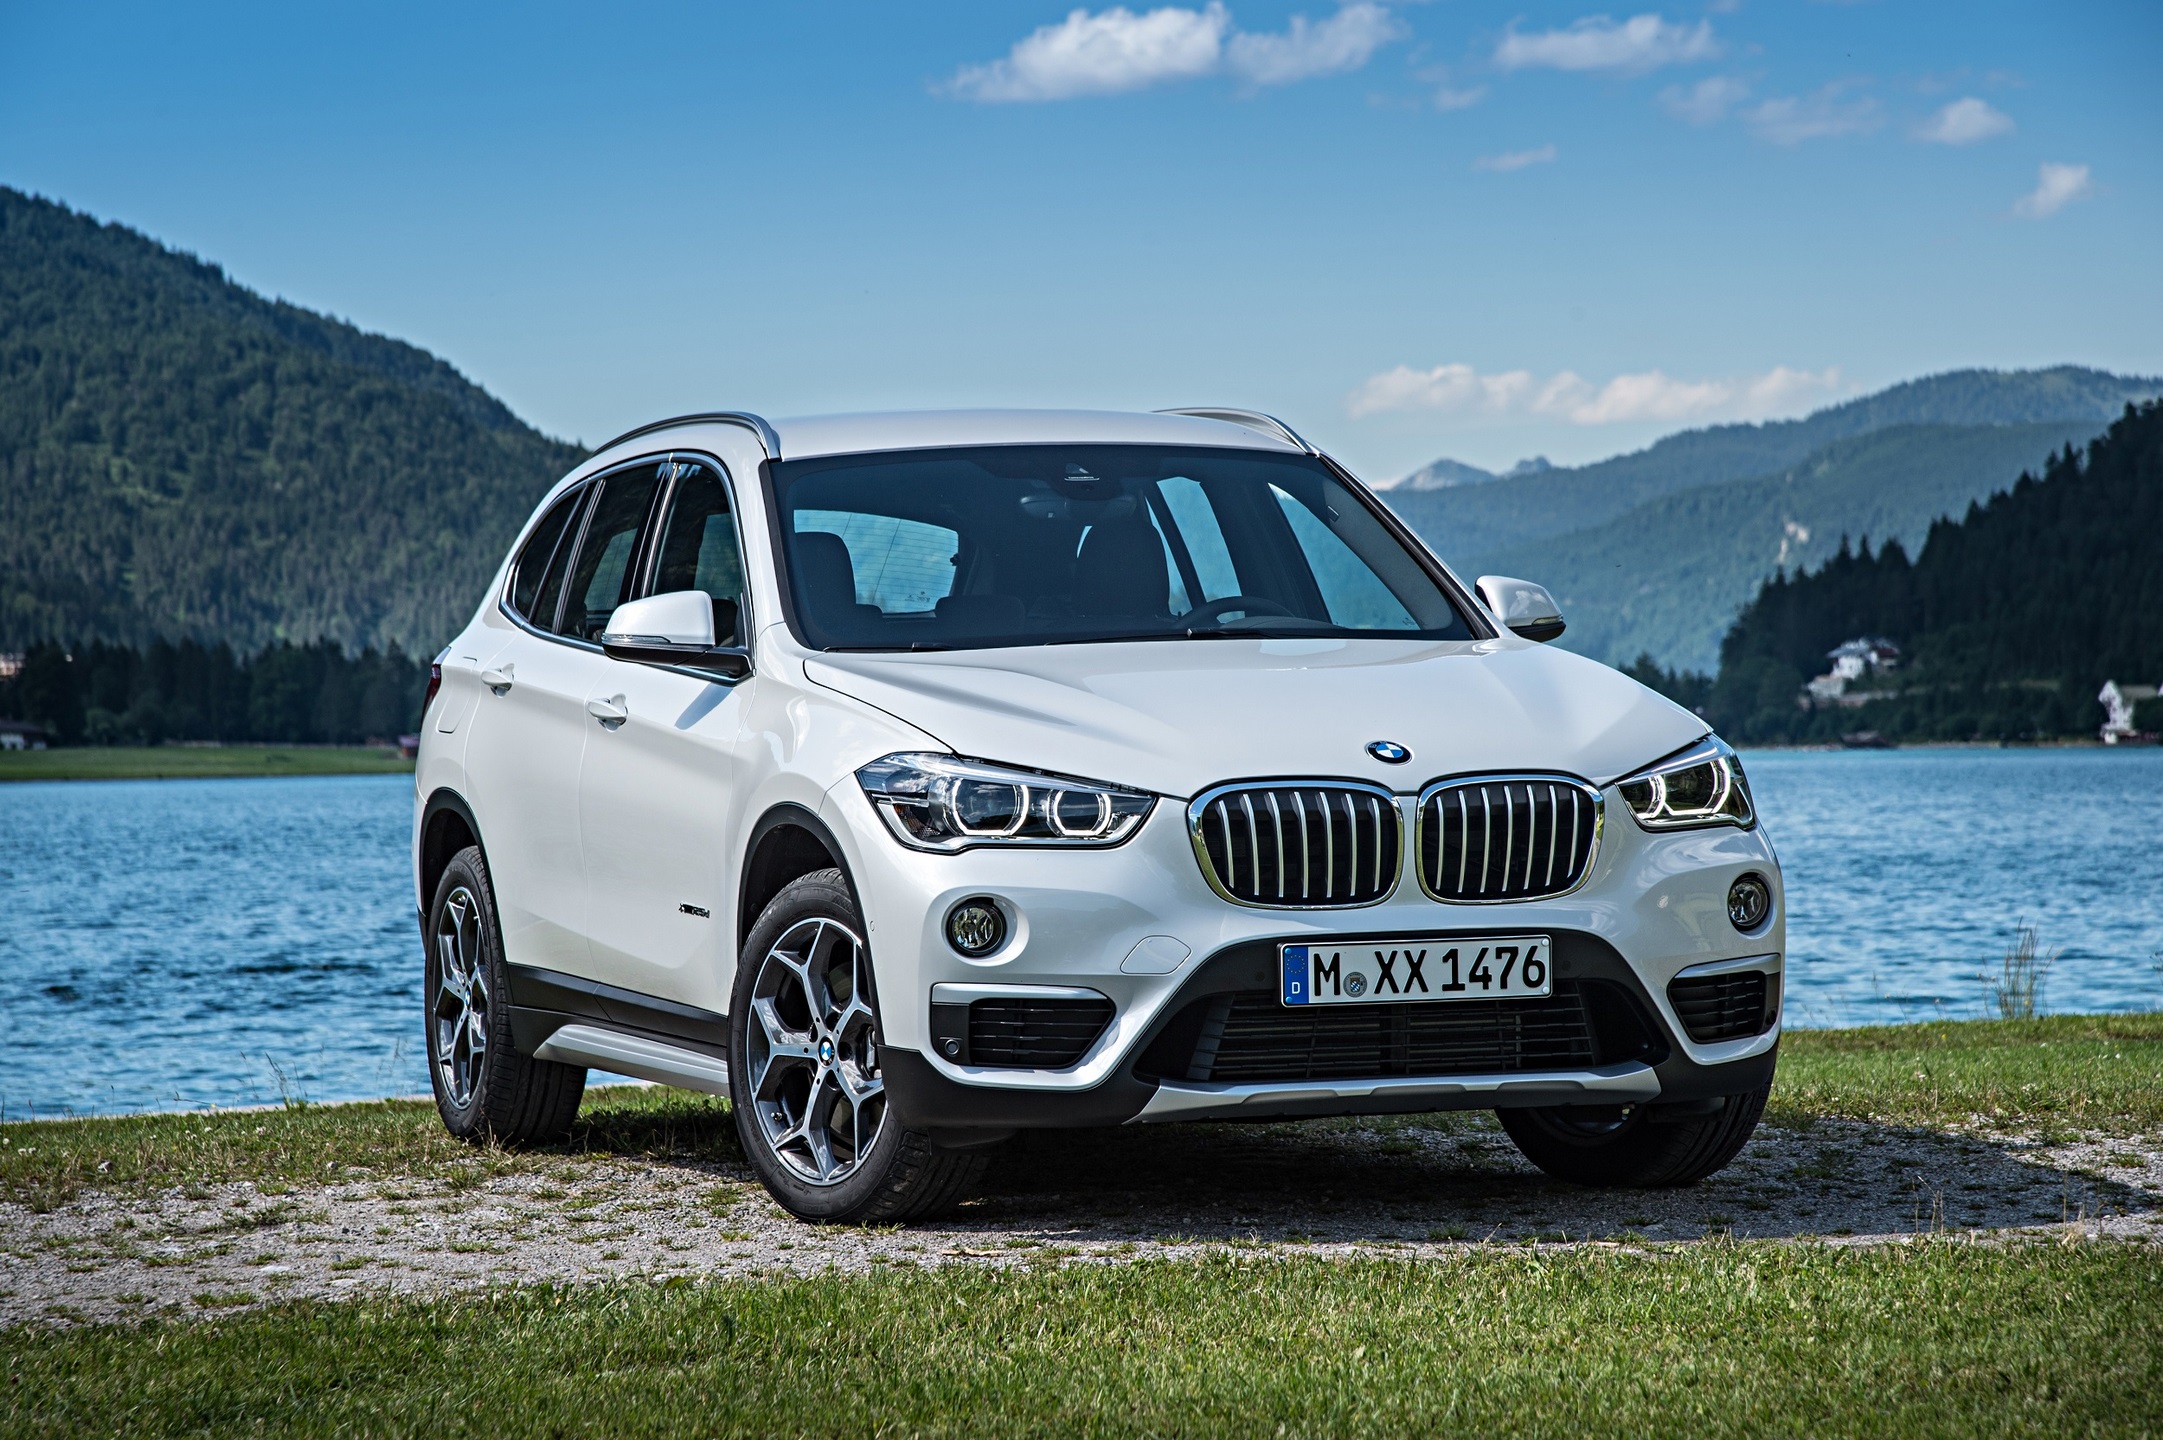 BMW X1 Petrol Launched in India - MotorBash.com